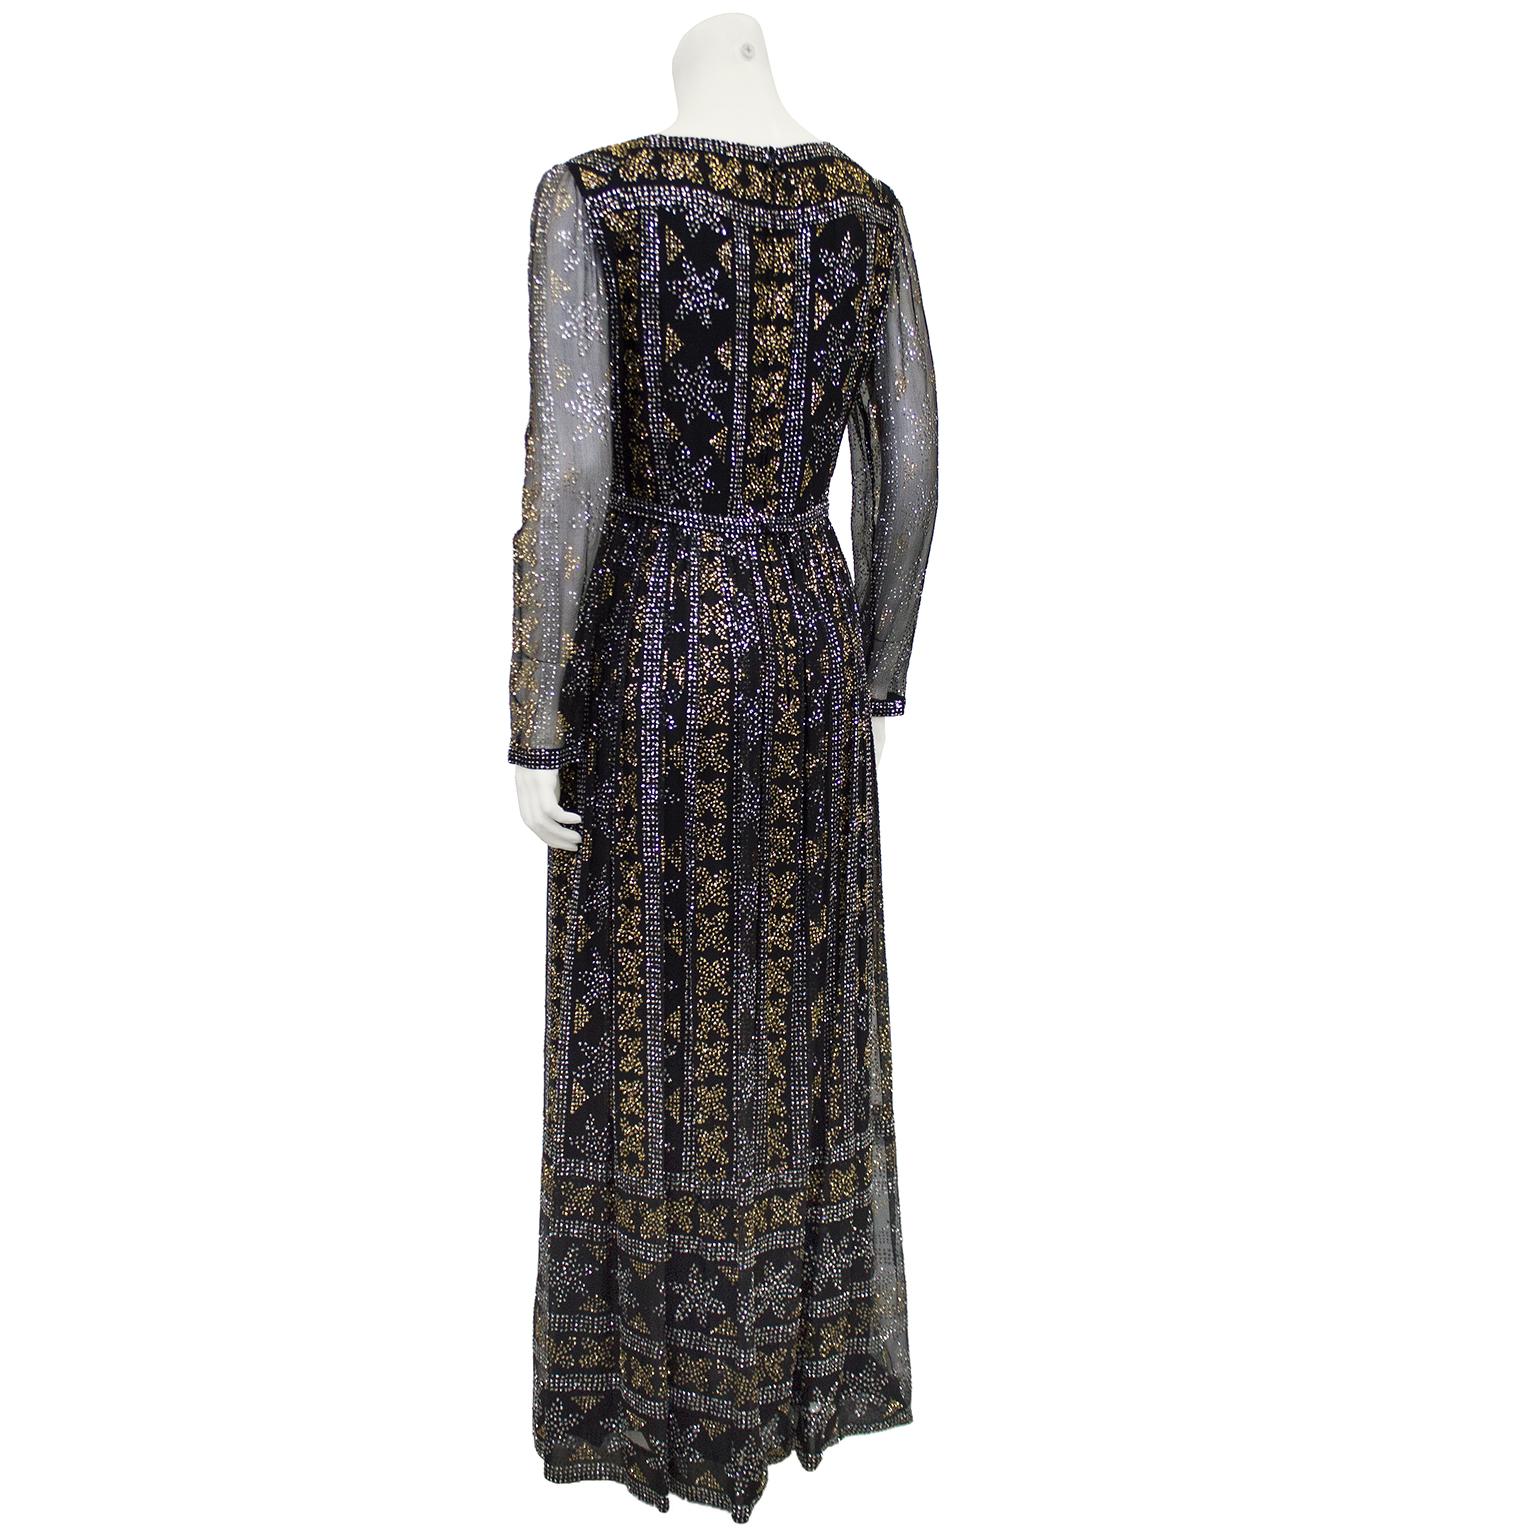 Black 1970's Malcom Starr Chiffon Gown with Silver and Gold Sparkles